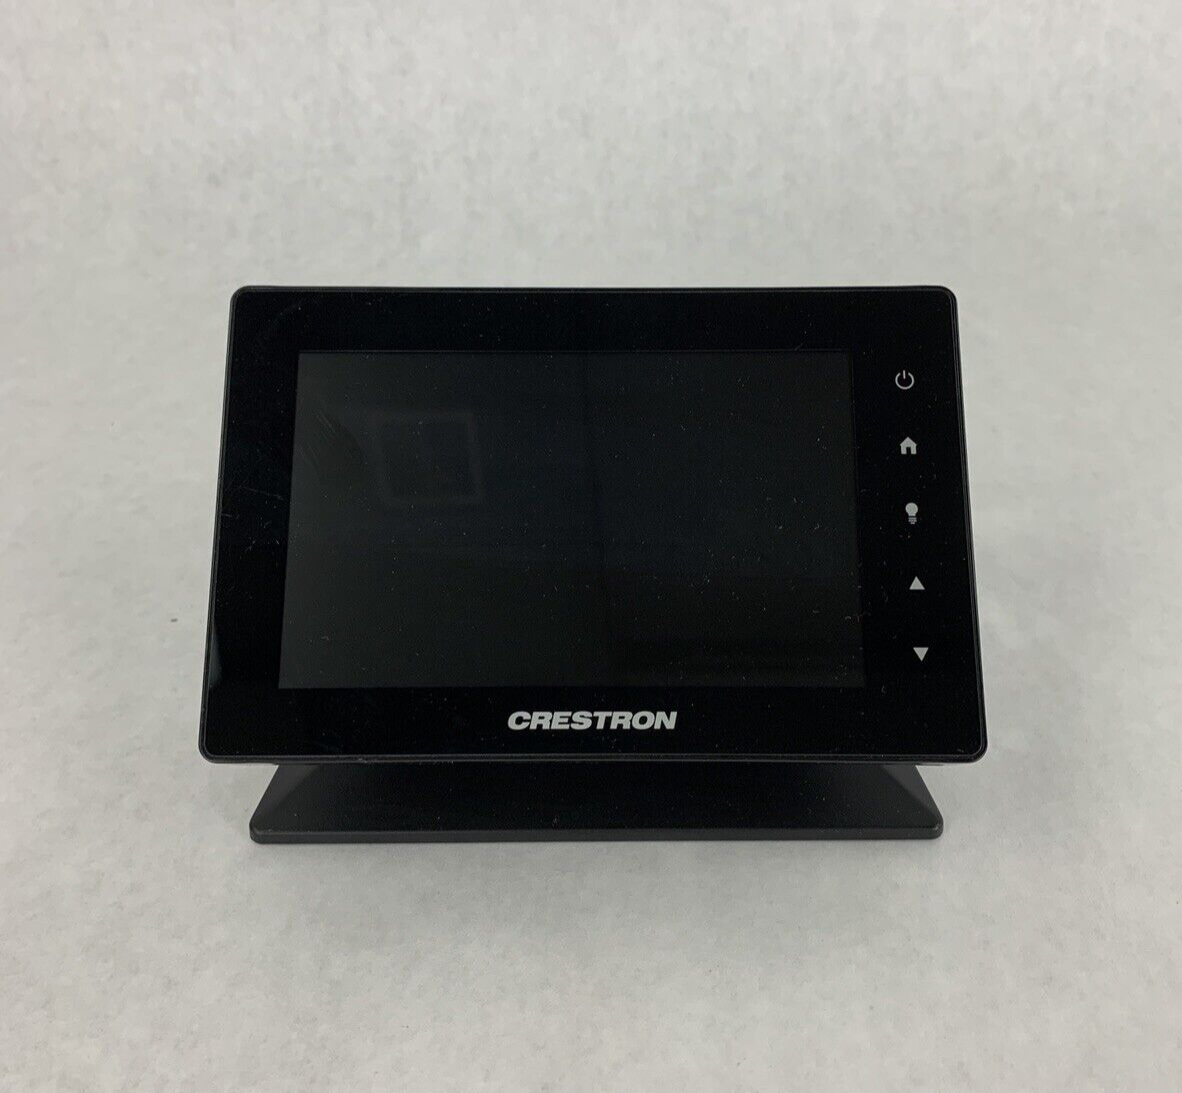 Crestron TSW-550-TTK-B-S 5” Touch Screen With Table Top Stand No OS